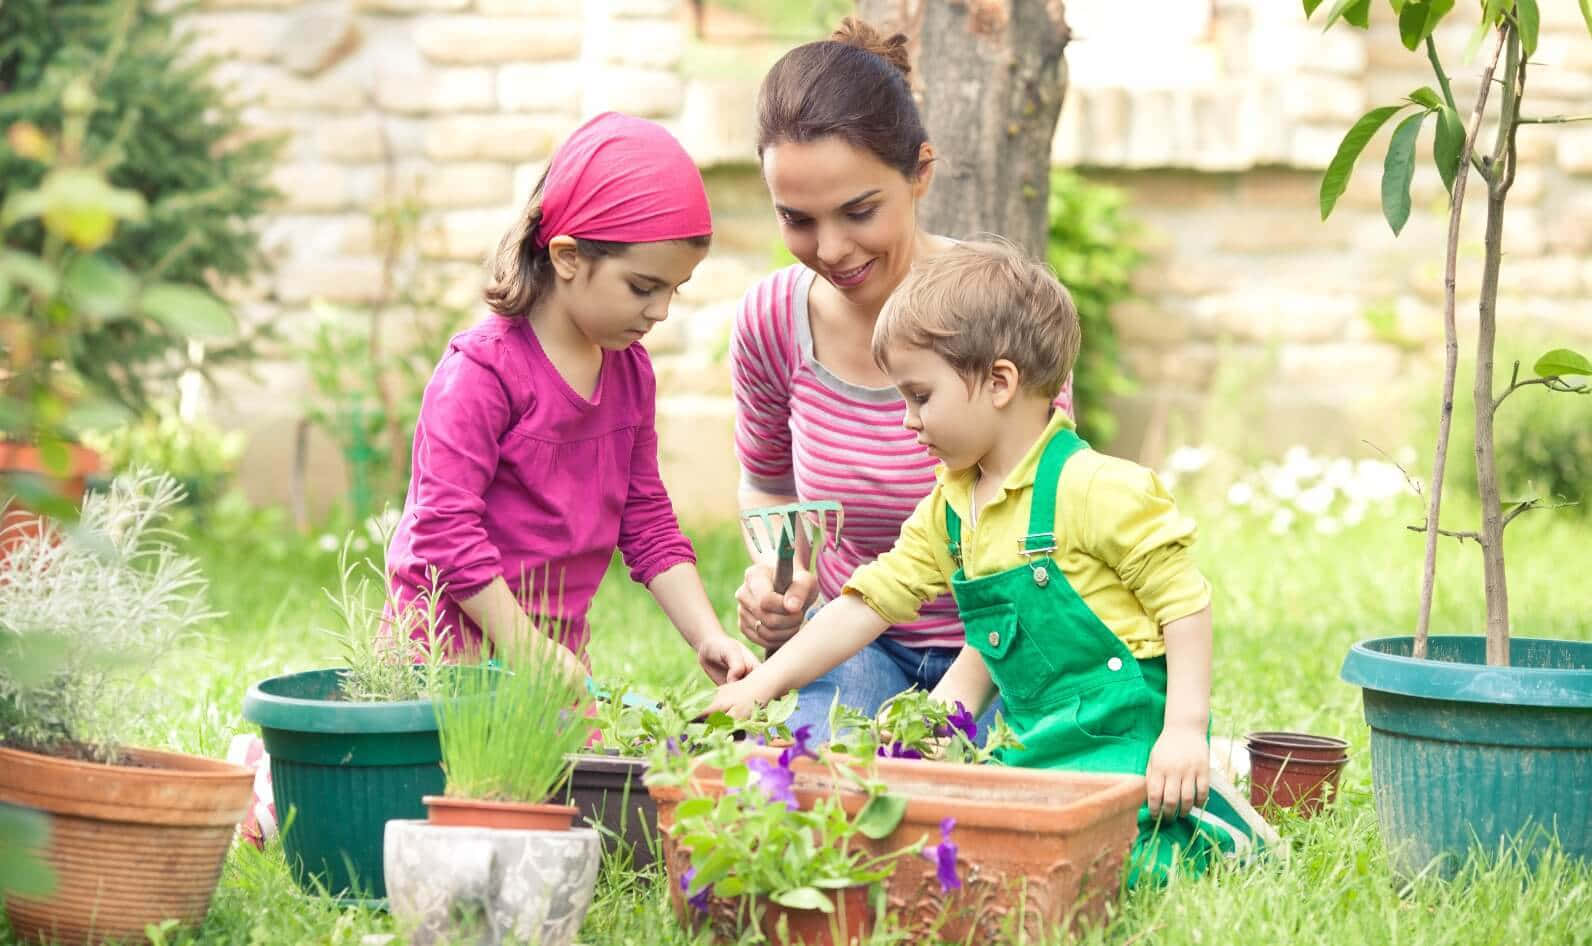 A Mother And Two Children Are Planting Flowers In The Garden